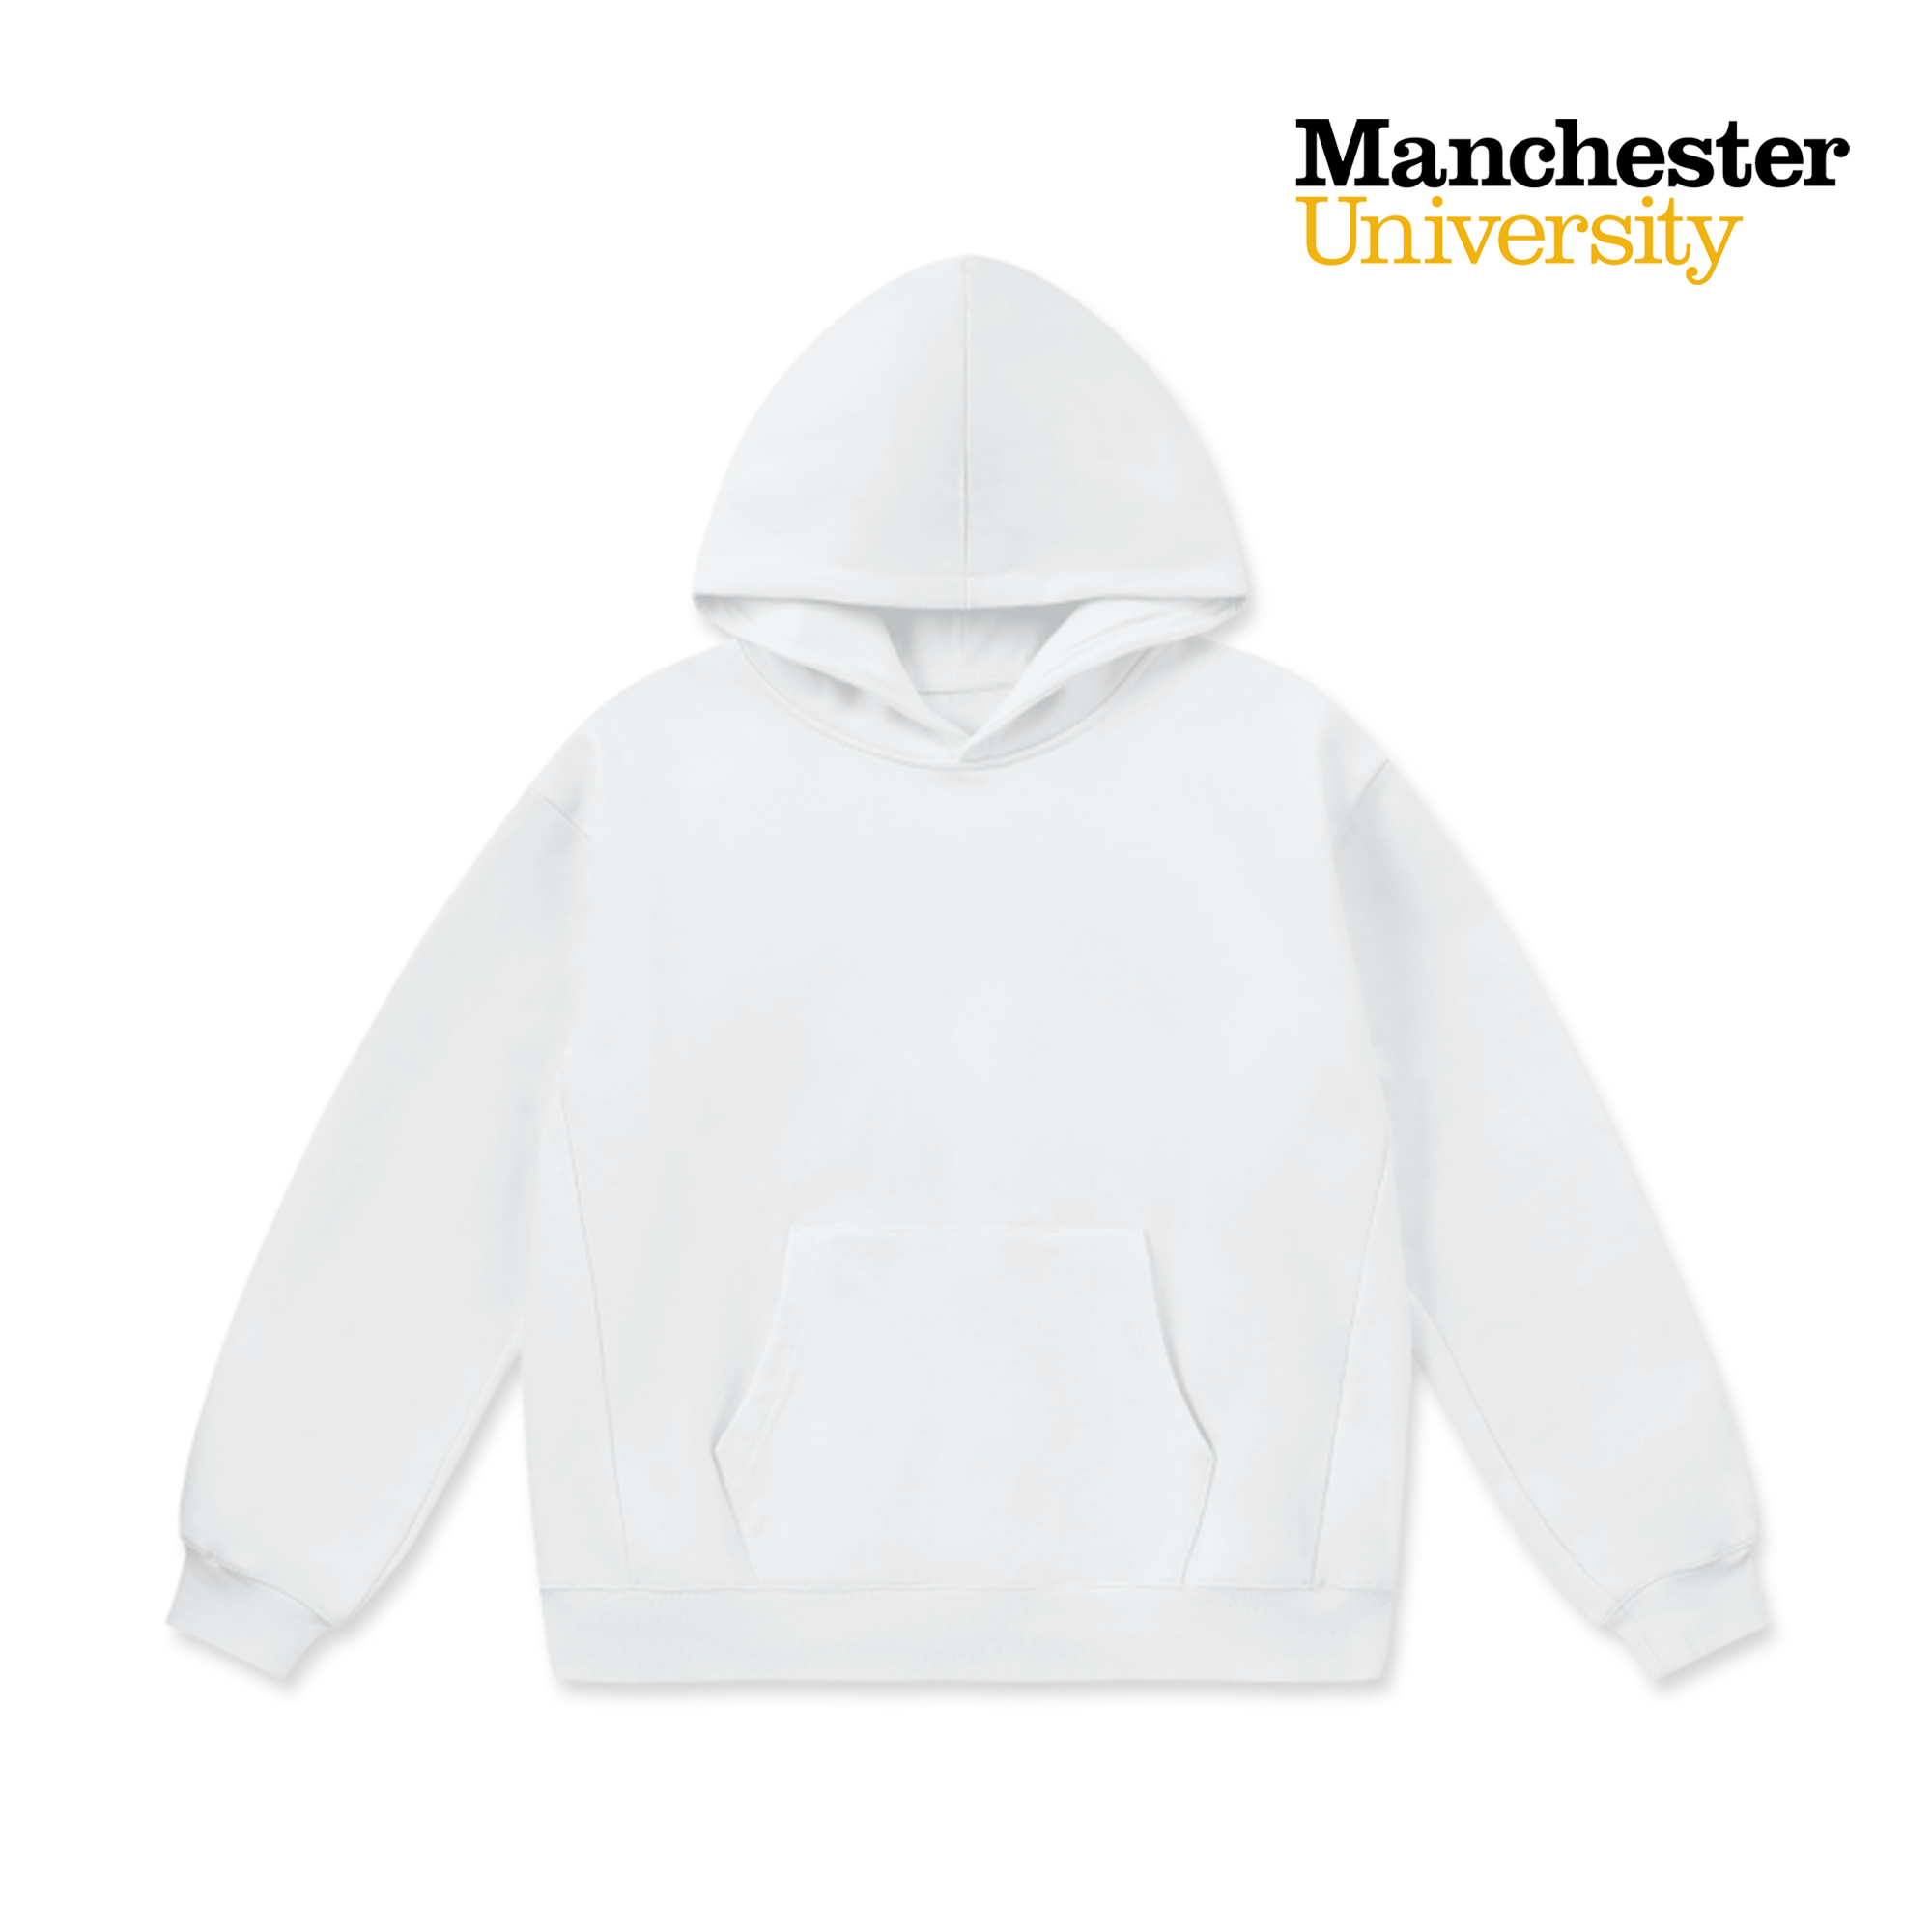 LCC Super Weighted Hoodie - Manchester University (Modern)